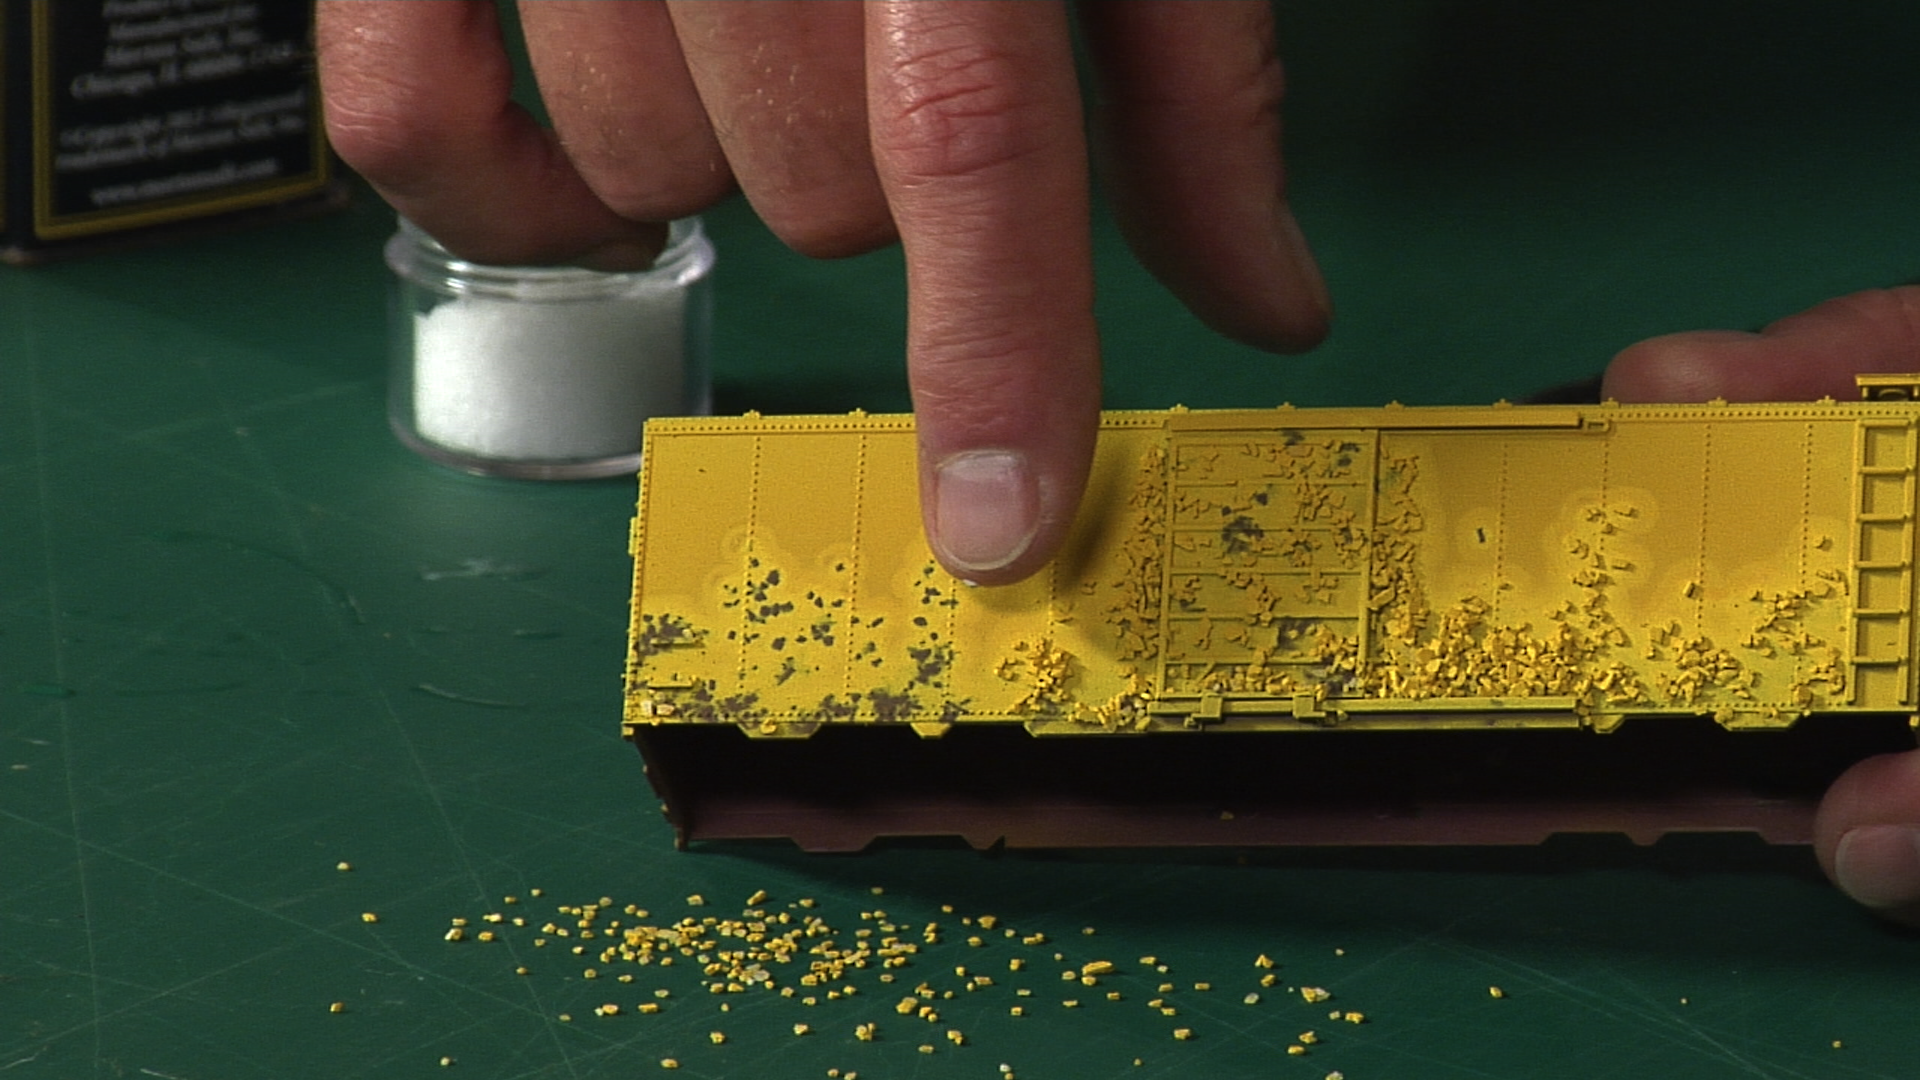 Using Salt for Weathering Model Railroad Paintproduct featured image thumbnail.